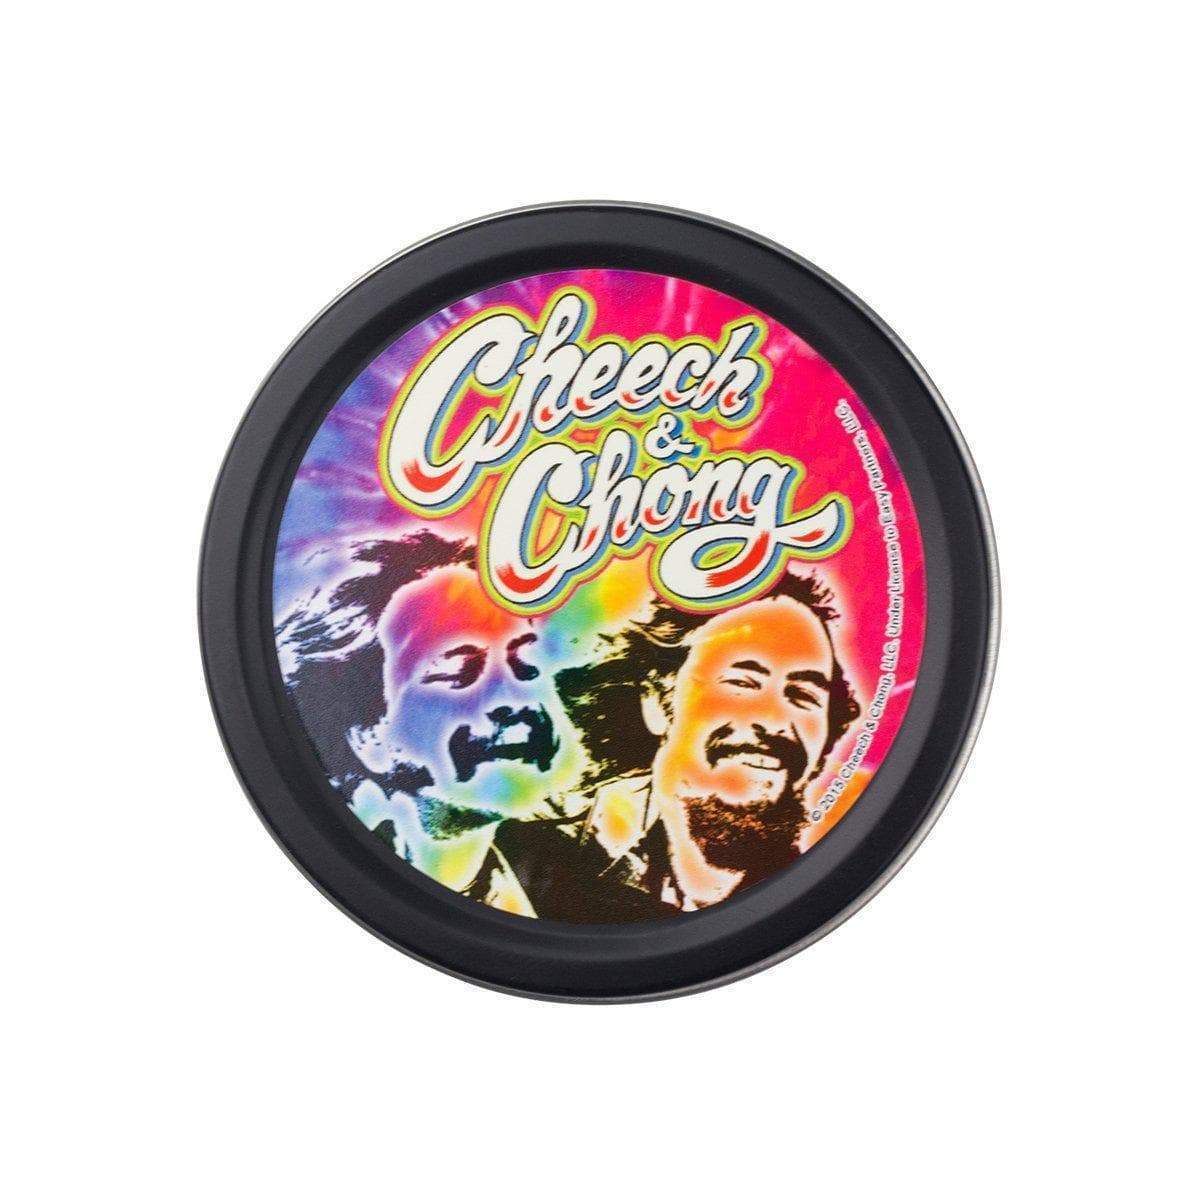 Wonderful pocket-ready round stashbox small tin container with funny comedy duo Cheech and Chong design on lid vintage look